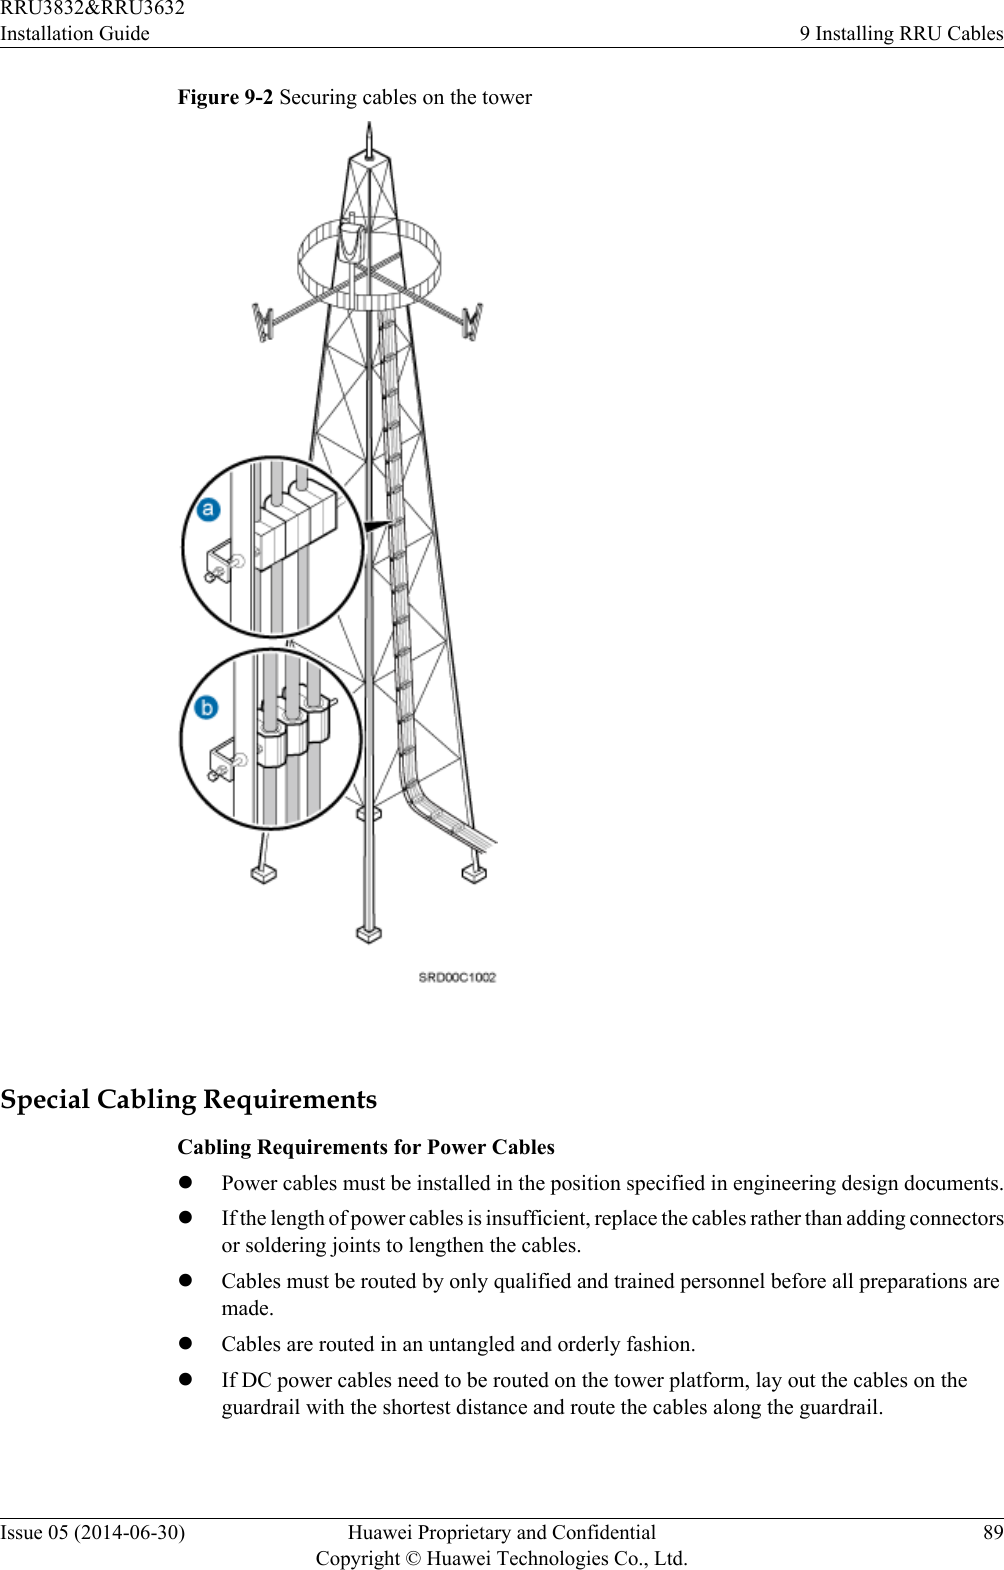 Figure 9-2 Securing cables on the tower Special Cabling RequirementsCabling Requirements for Power CableslPower cables must be installed in the position specified in engineering design documents.lIf the length of power cables is insufficient, replace the cables rather than adding connectorsor soldering joints to lengthen the cables.lCables must be routed by only qualified and trained personnel before all preparations aremade.lCables are routed in an untangled and orderly fashion.lIf DC power cables need to be routed on the tower platform, lay out the cables on theguardrail with the shortest distance and route the cables along the guardrail.RRU3832&amp;RRU3632Installation Guide 9 Installing RRU CablesIssue 05 (2014-06-30) Huawei Proprietary and ConfidentialCopyright © Huawei Technologies Co., Ltd.89